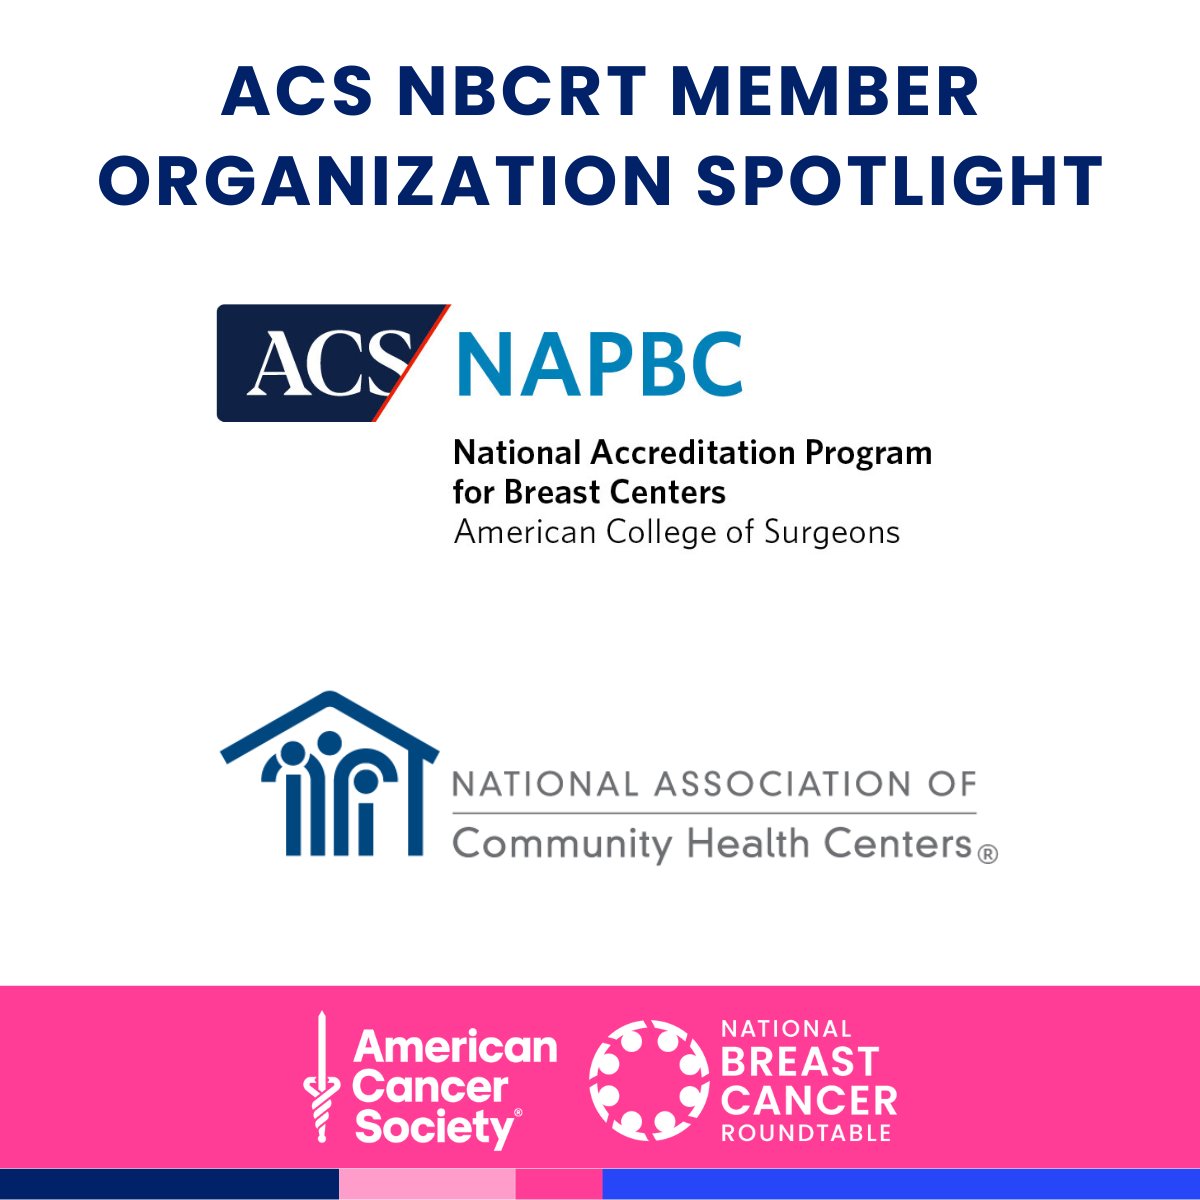 Two organizations take the stage in today's ACS NBCRT member organization spotlight: the National Accreditation Program for Breast Centers and the National Association of Community Health Centers (NACHC). Thank you for your commitment to the ACS NBCRT!